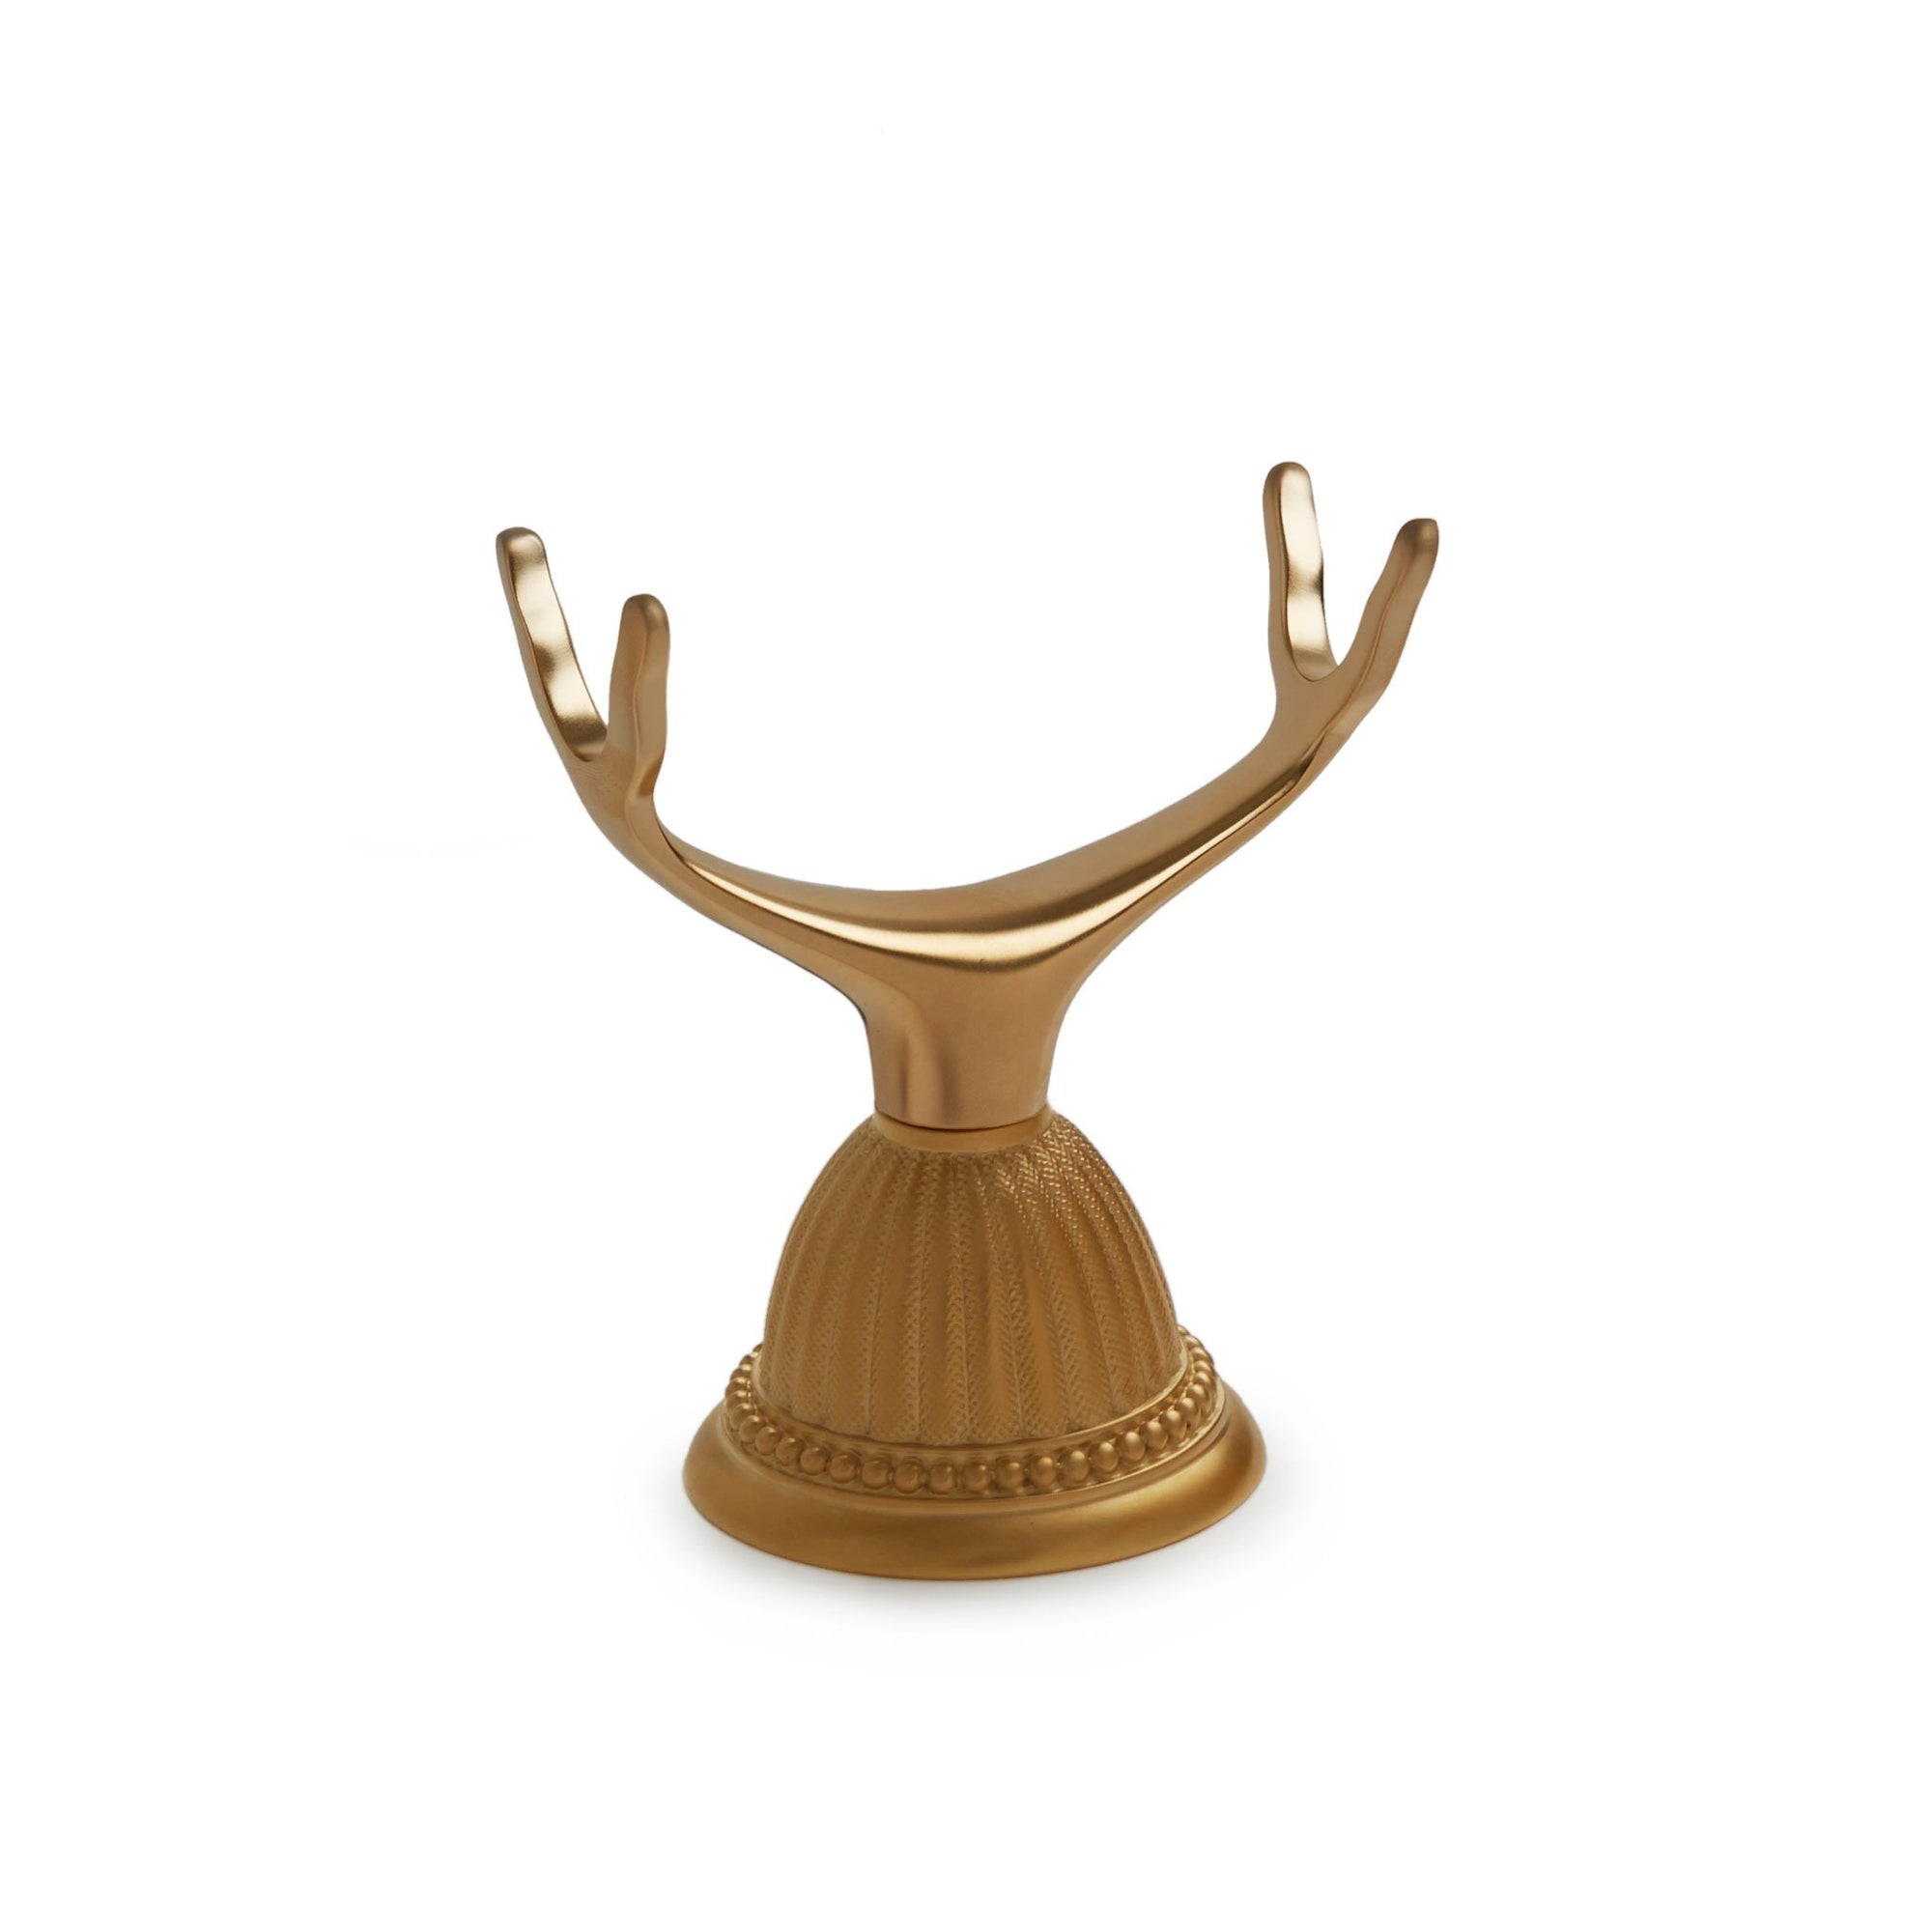 0849DKMT-CL-GP Sherle Wagner International Deck Mount Cradle with Classical Escutcheon in Gold Plate metal finish